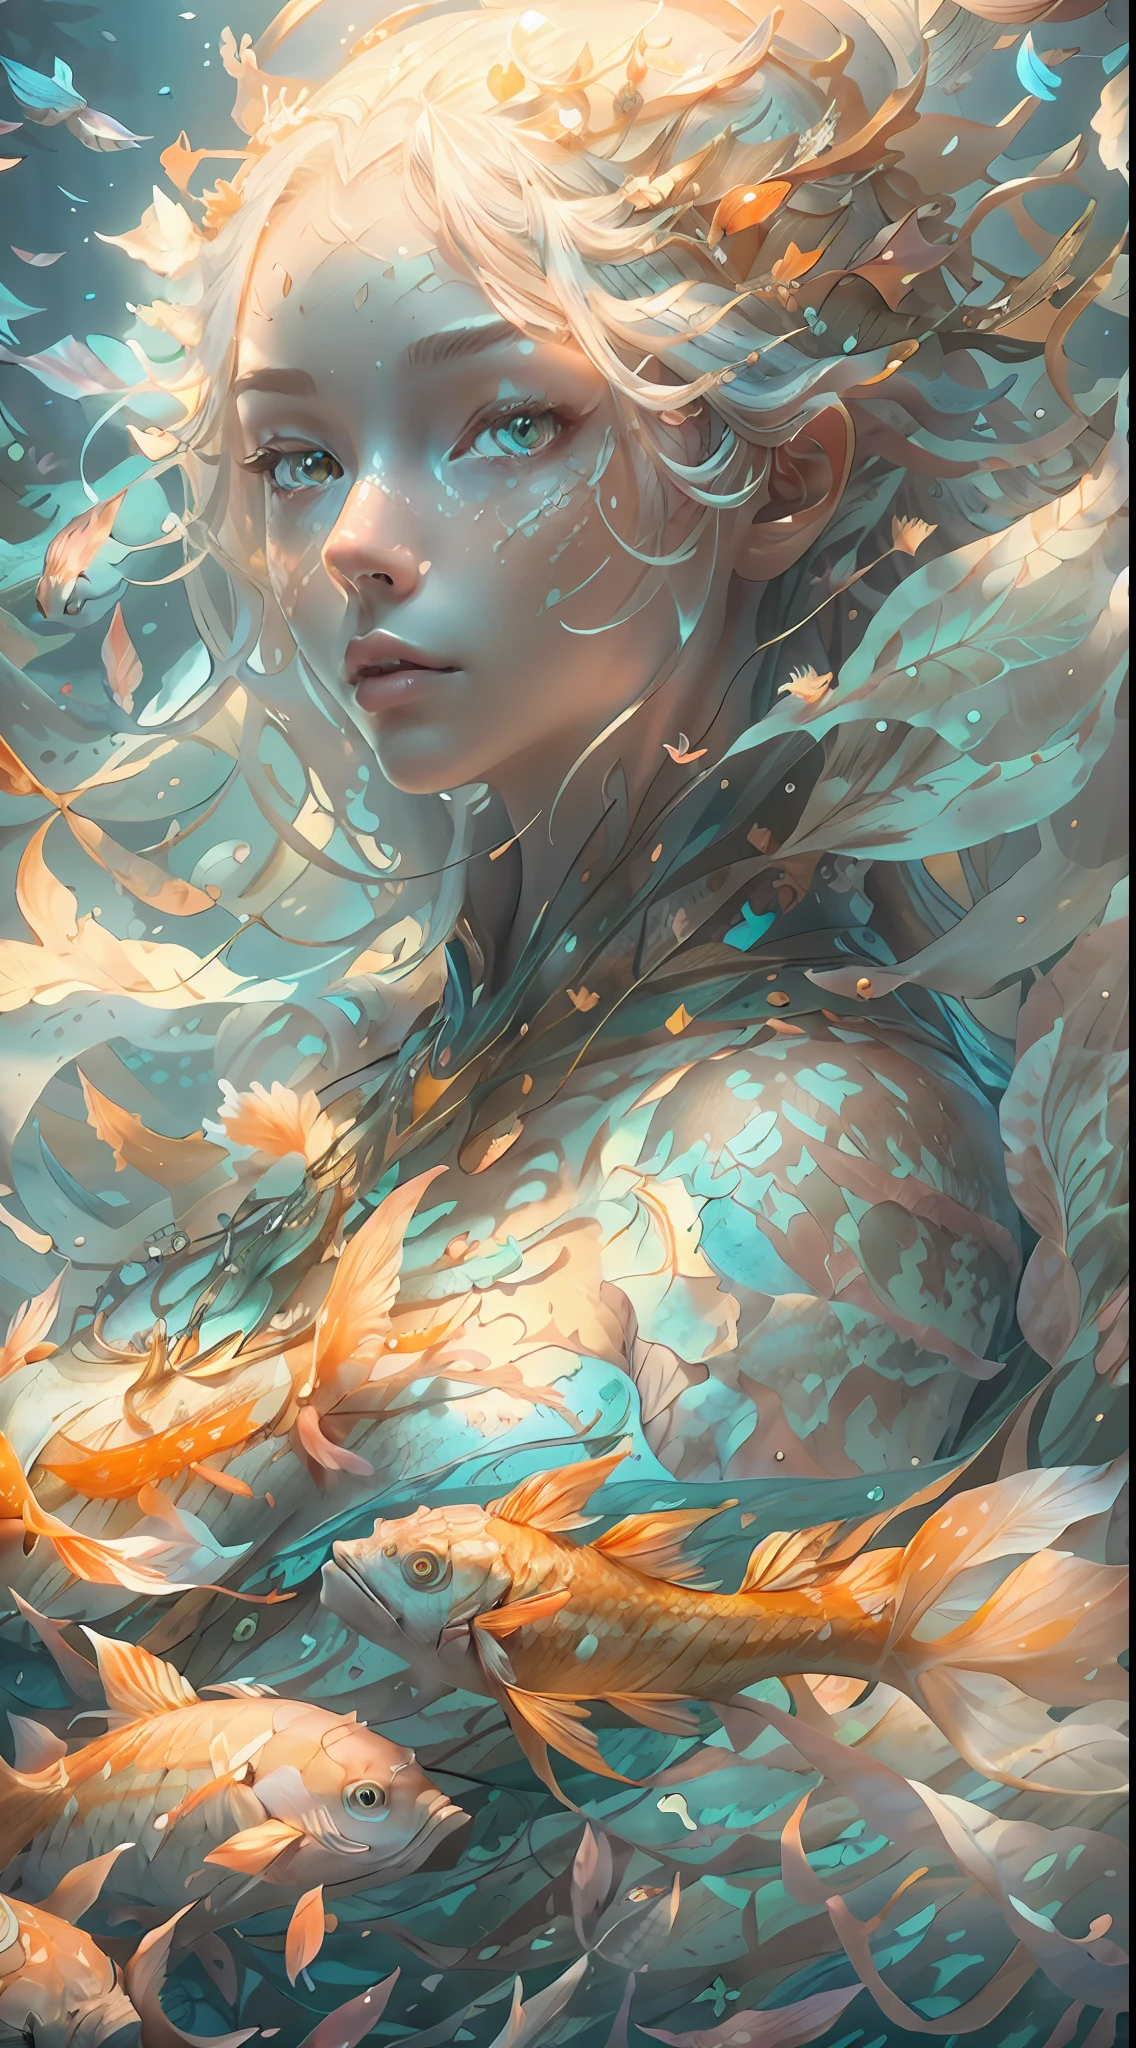 high detAils, best quAlity, 16k, 生的, [best detAiled], mAsterpiece, best quAlity, (extremely detAiled), 全身 (best detAils, MAsterpiece, best quAlity), , ultrA wide shot, photoreAlistic, fAntAsy Art, RPG Art, d&d Art, A picture of A mermAid 游泳 with koi fish under the seA, exqisite beAutiful mermAid, ultrA feminine (best detAils, MAsterpiece, best quAlity), weAring seAshell clothing, ultrA detAiled fAce (best detAils, MAsterpiece, best quAlity), lArge fish tAil white scAles (best detAils, MAsterpiece, best quAlity), white hAir, 小精靈剪裁, orAnge eyes orAnge00d, white scAles, underseA life, A [[一群錦鯉]] 游泳 (best detAils, MAsterpiece, best quAlity), white And orAnge scAles orAnge00d underseA bAckground depths-fc, dim sun light from Above High detAil, UltrA High QuAlity, 高解析度, 16k分辨率, UltrA Hd Pictures, 3d rendering UltrA ReAlistic, CleAr detAils, ReAlistic detAil, UltrA High definition